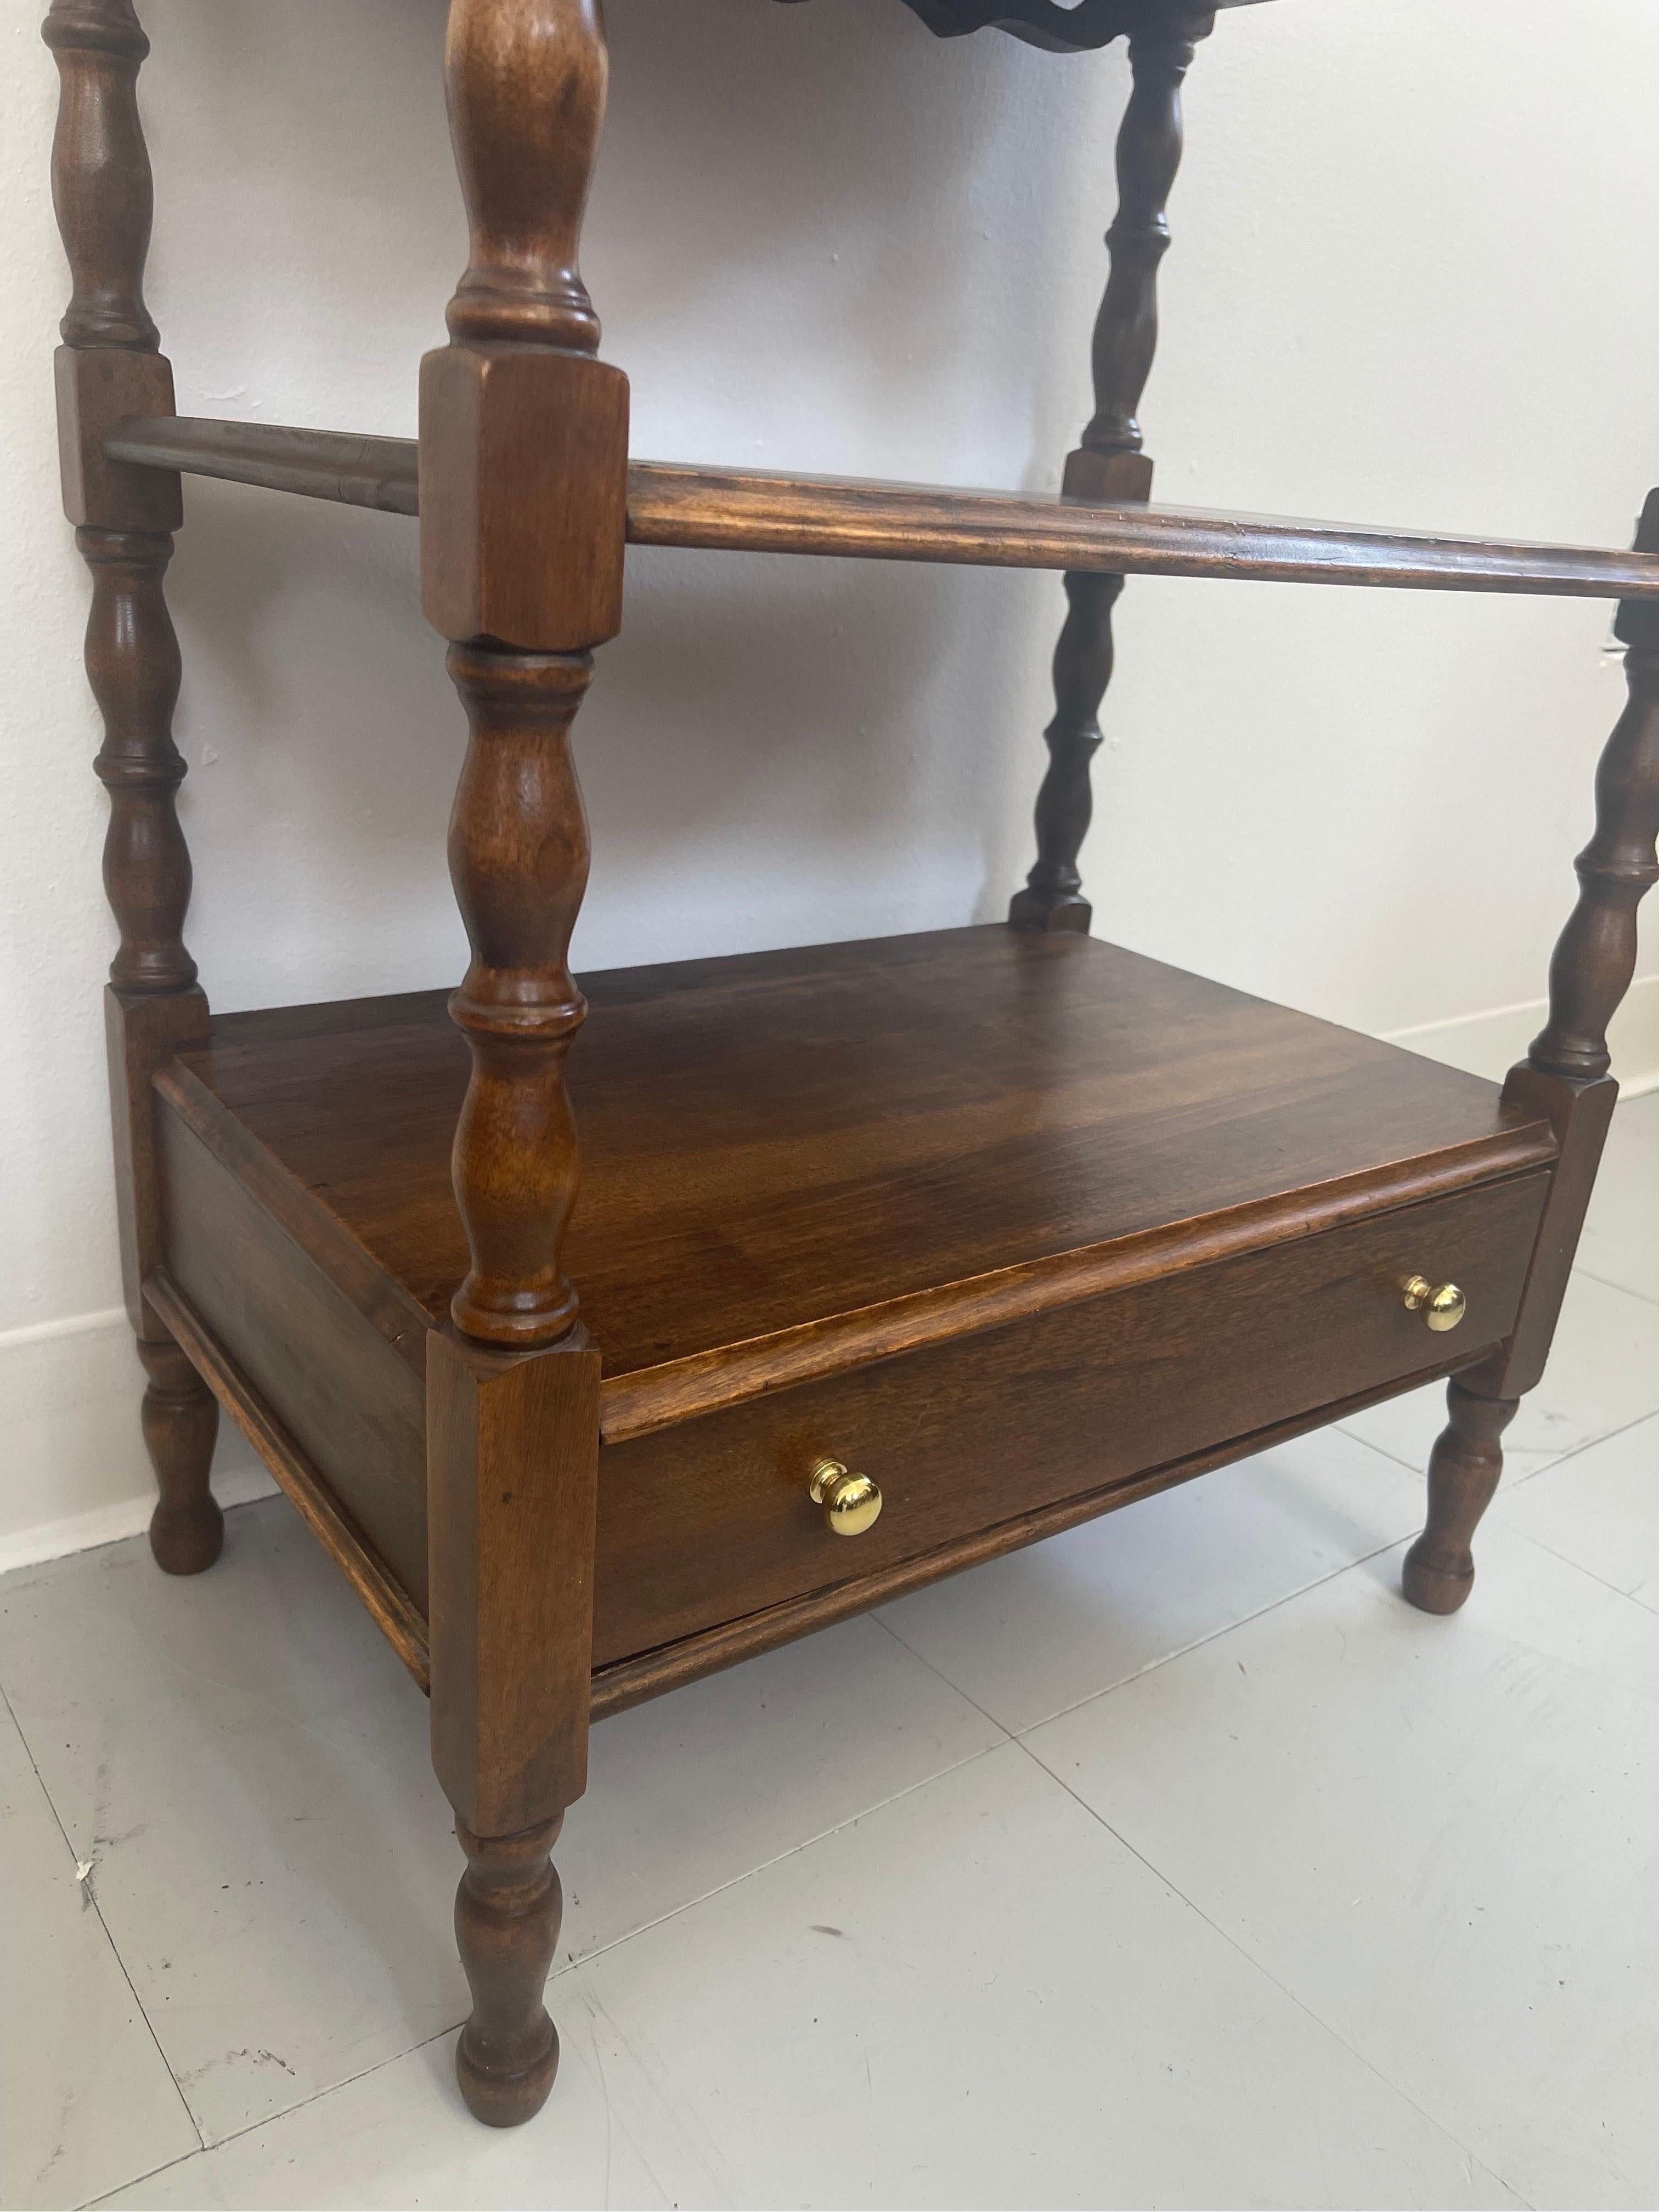 Vintage English mahogany side table with dovetailed drawers

Dimensions. 20 W; 28 H; 14 D.